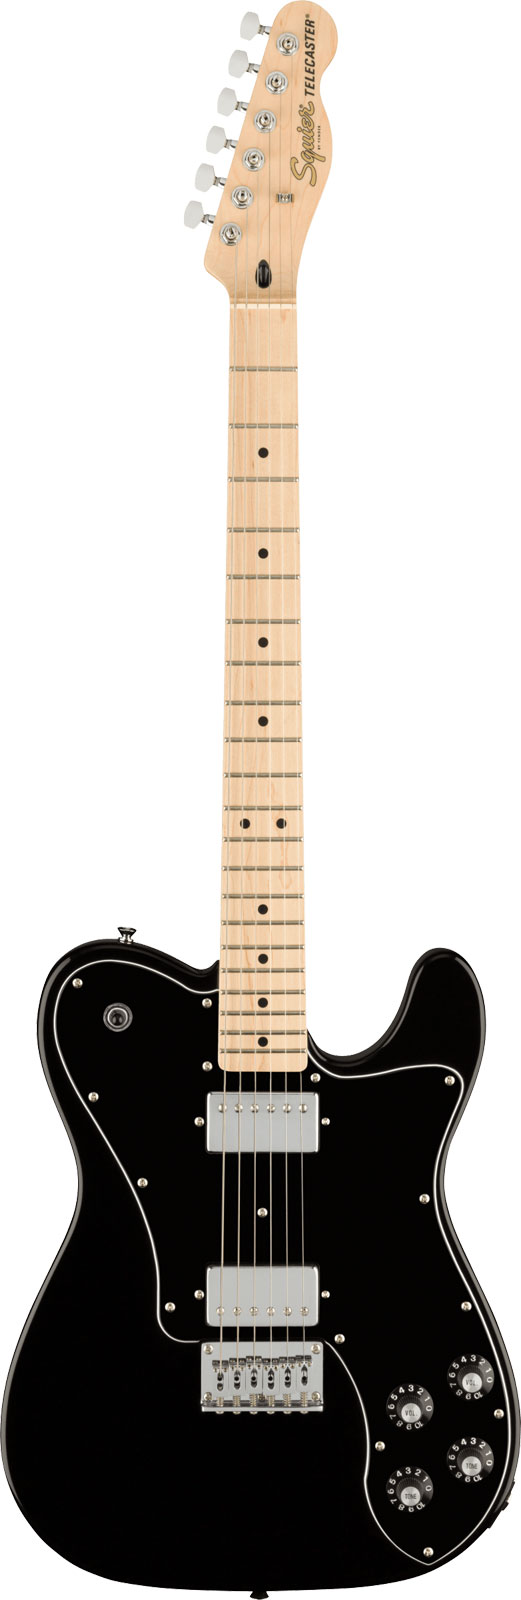 SQUIER TELECASTER DELUXE AFFINITY MN BLACK